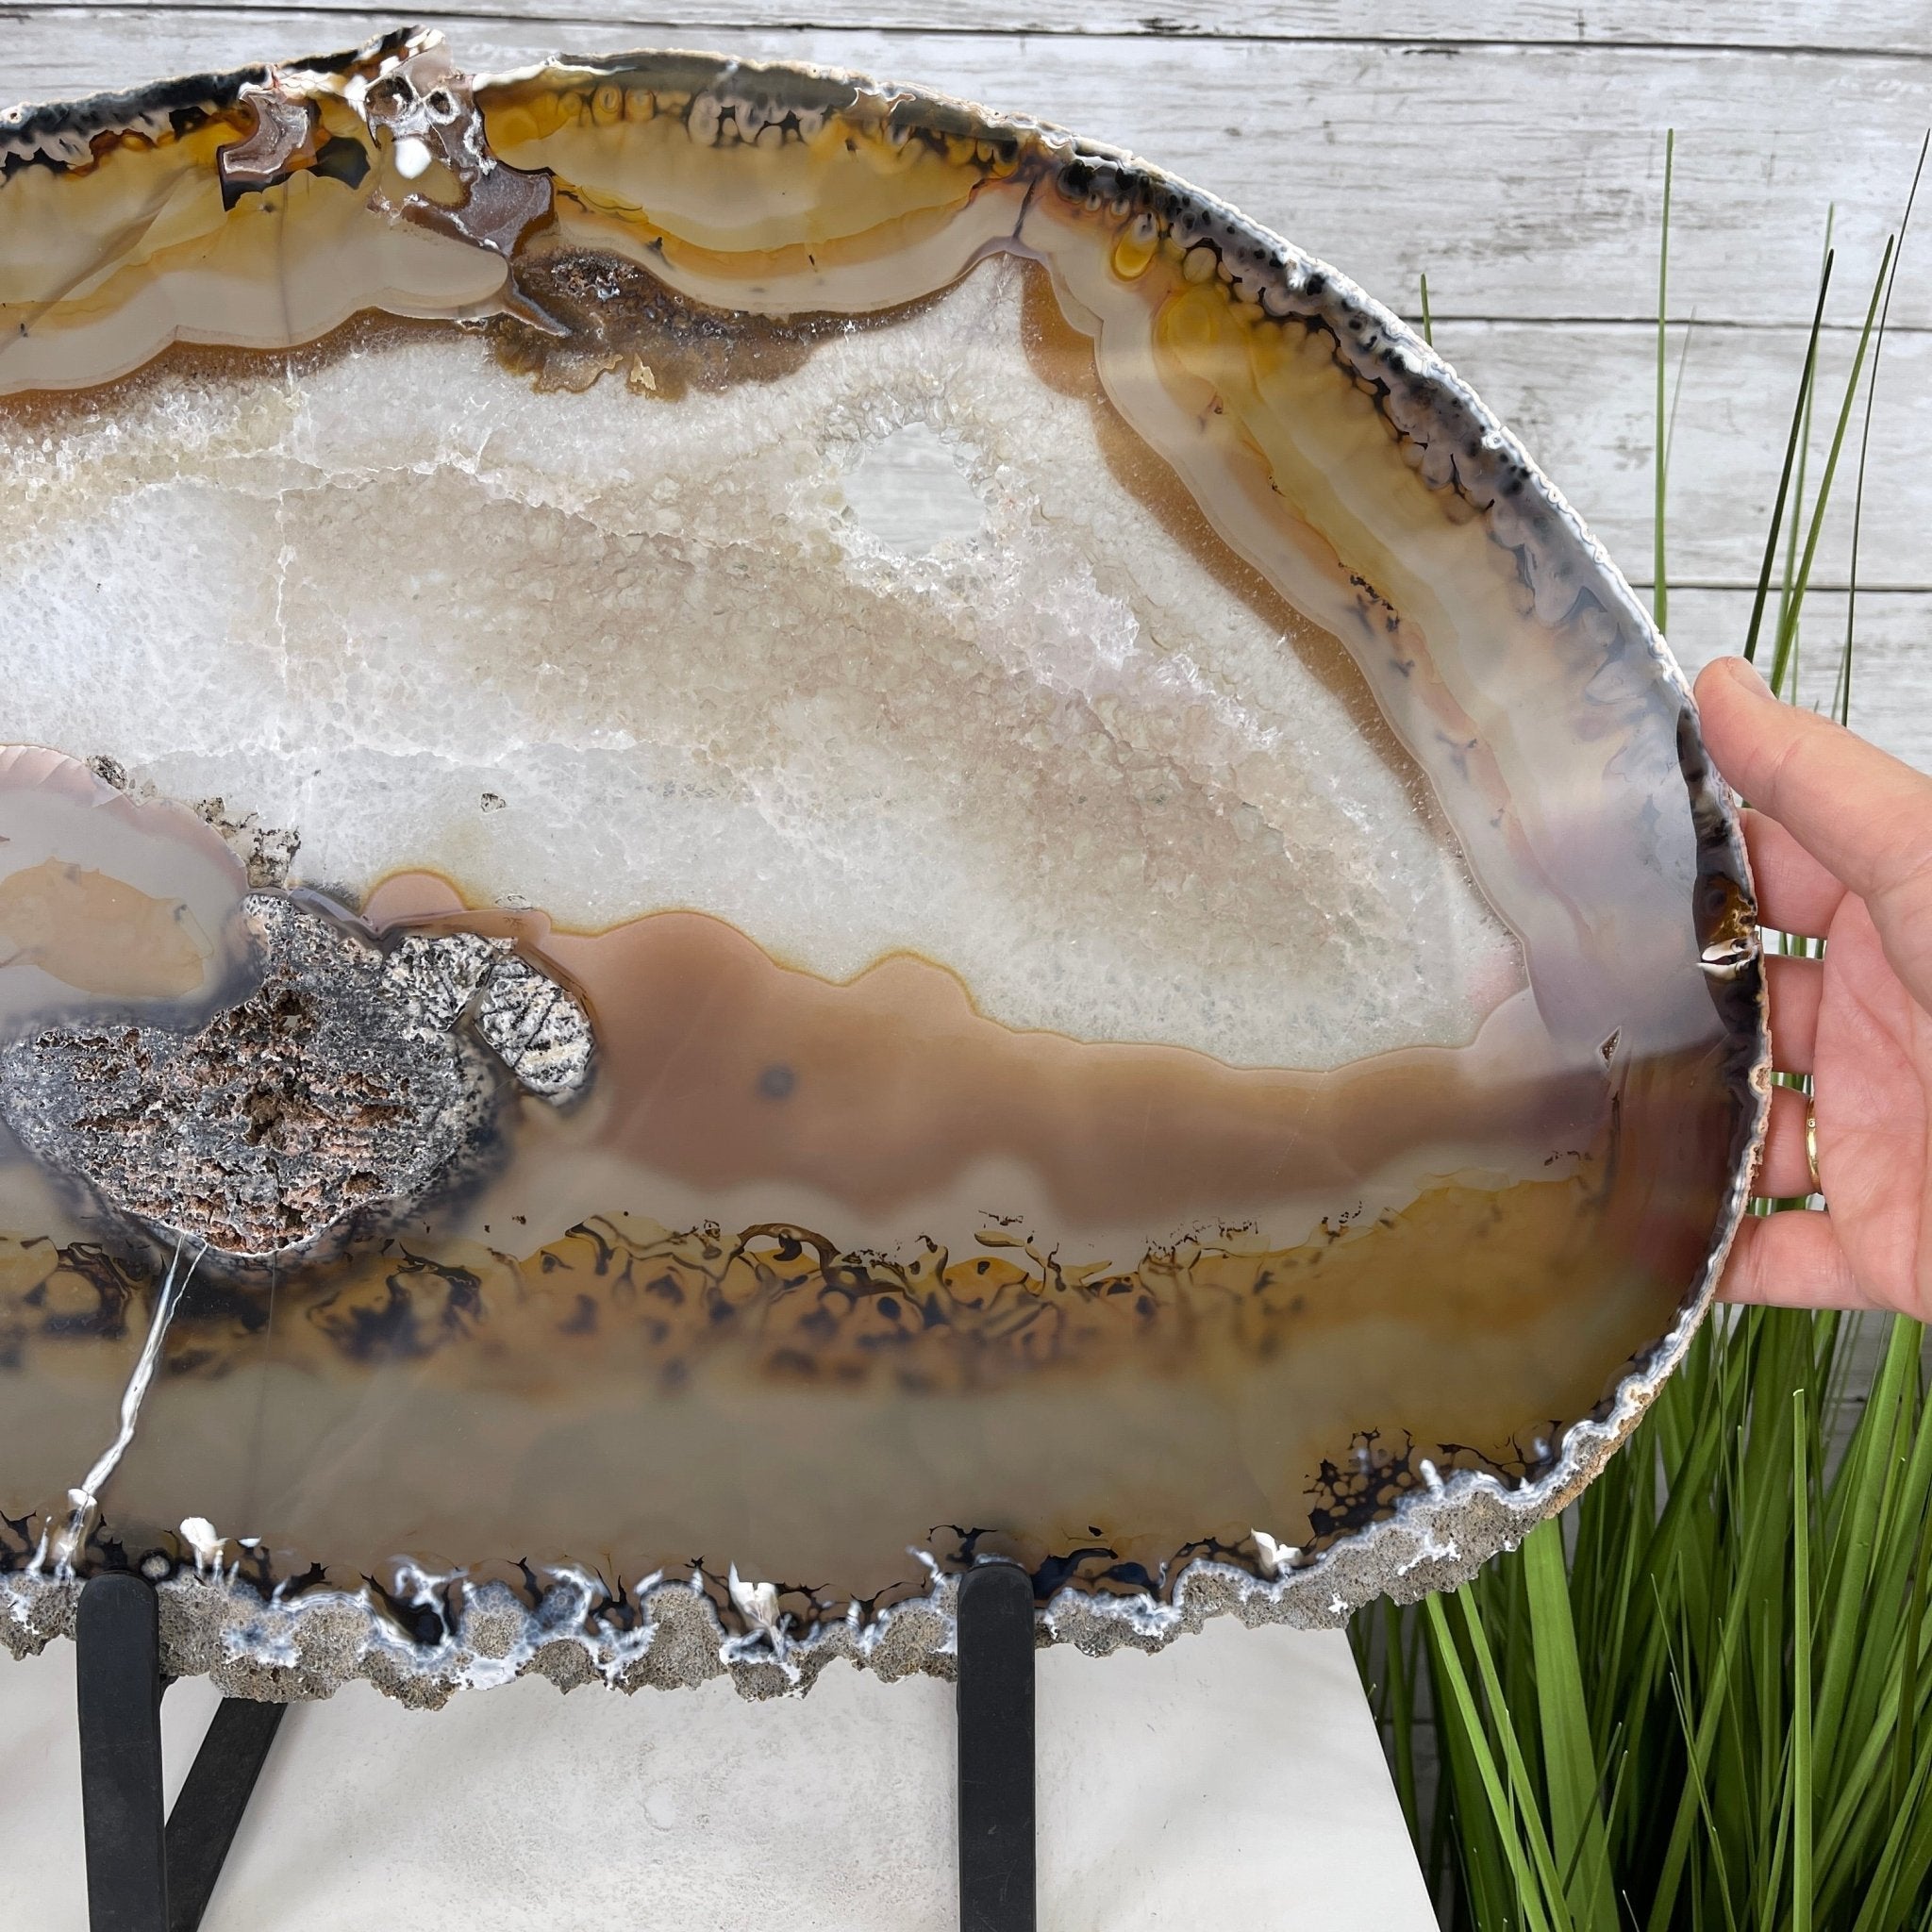 Special Large Natural Brazilian Agate Slice on a Metal Stand, 19.1" x 14.5" Tall Model #5056-0026 by Brazil Gems - Brazil GemsBrazil GemsSpecial Large Natural Brazilian Agate Slice on a Metal Stand, 19.1" x 14.5" Tall Model #5056-0026 by Brazil GemsSlices on Fixed Bases5056-0026